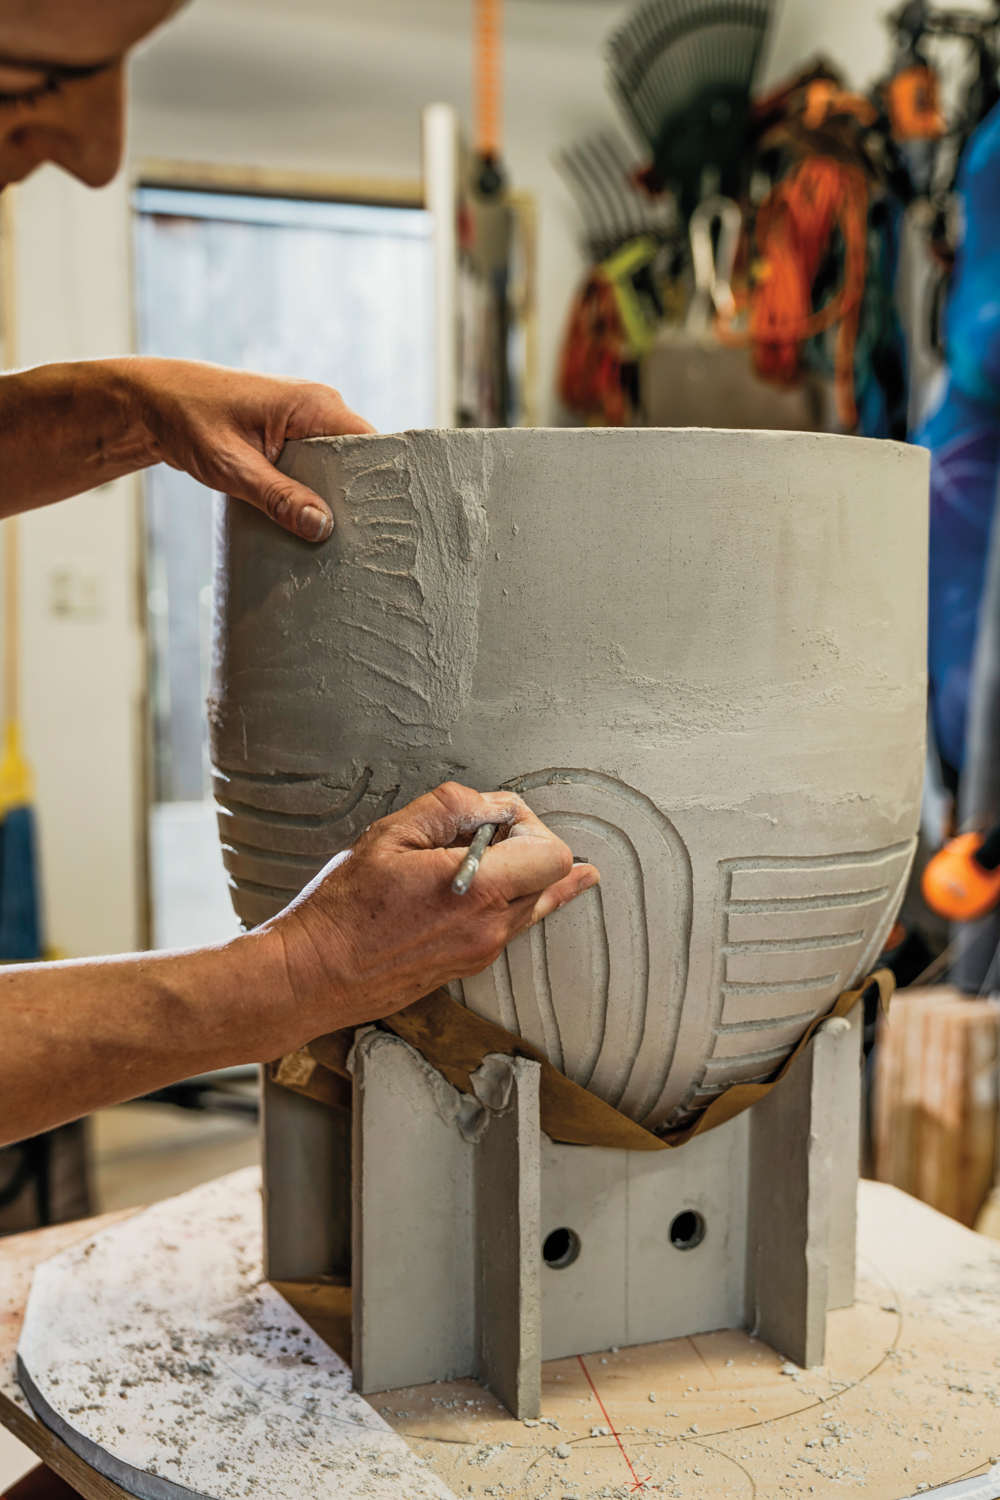 ceramicist carving designs into one of her clay objects